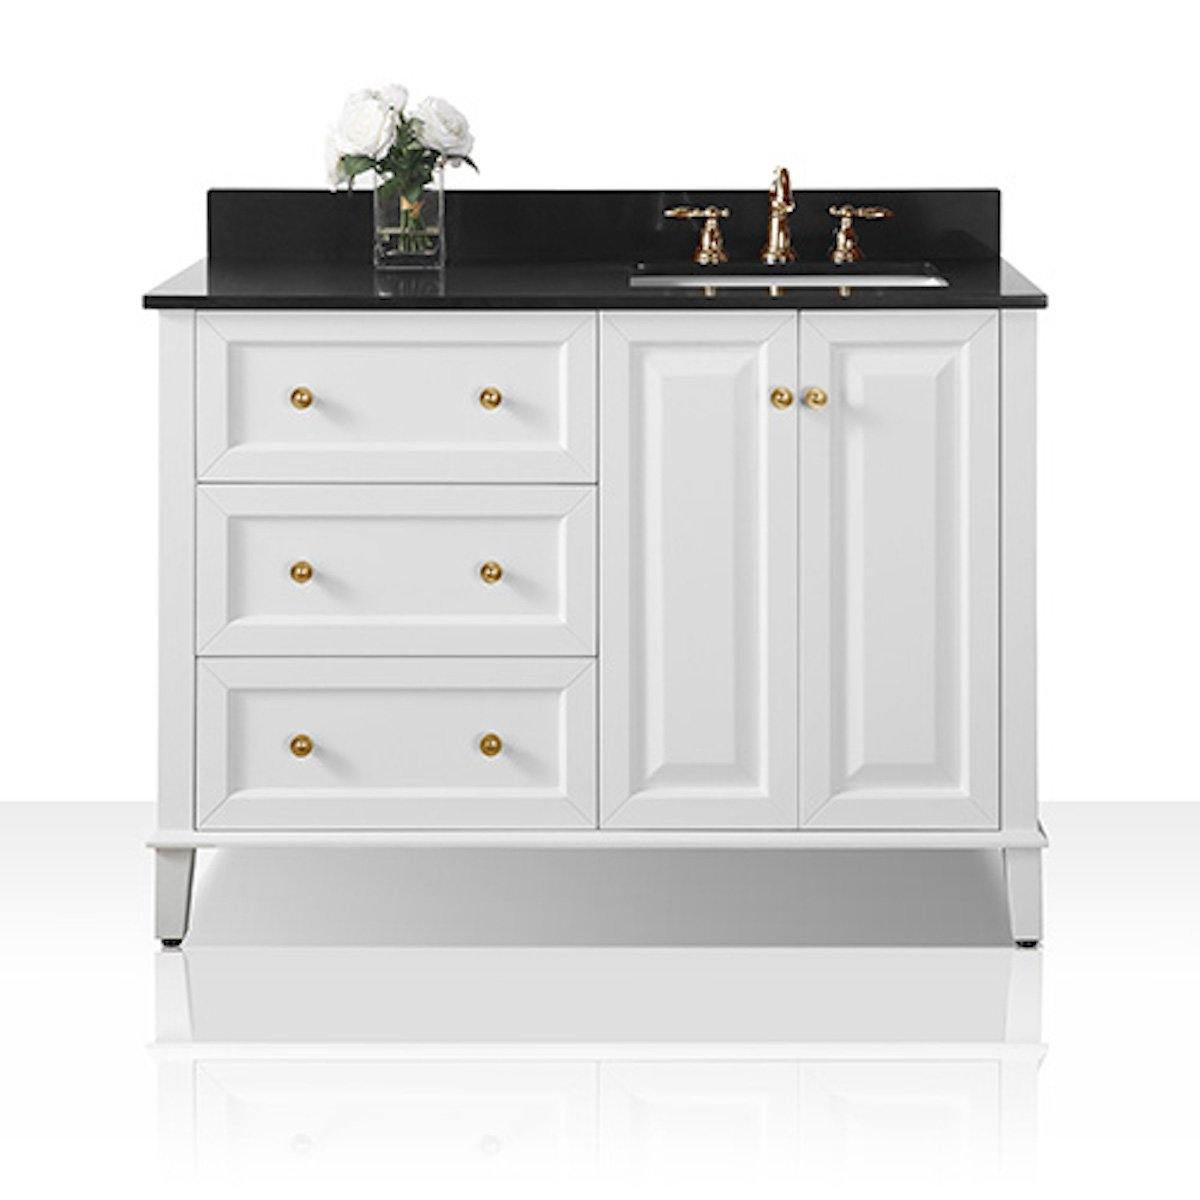 Ancerre Designs Hannah 48 Inch White Single Vanity with Right Basin and Gold Hardware